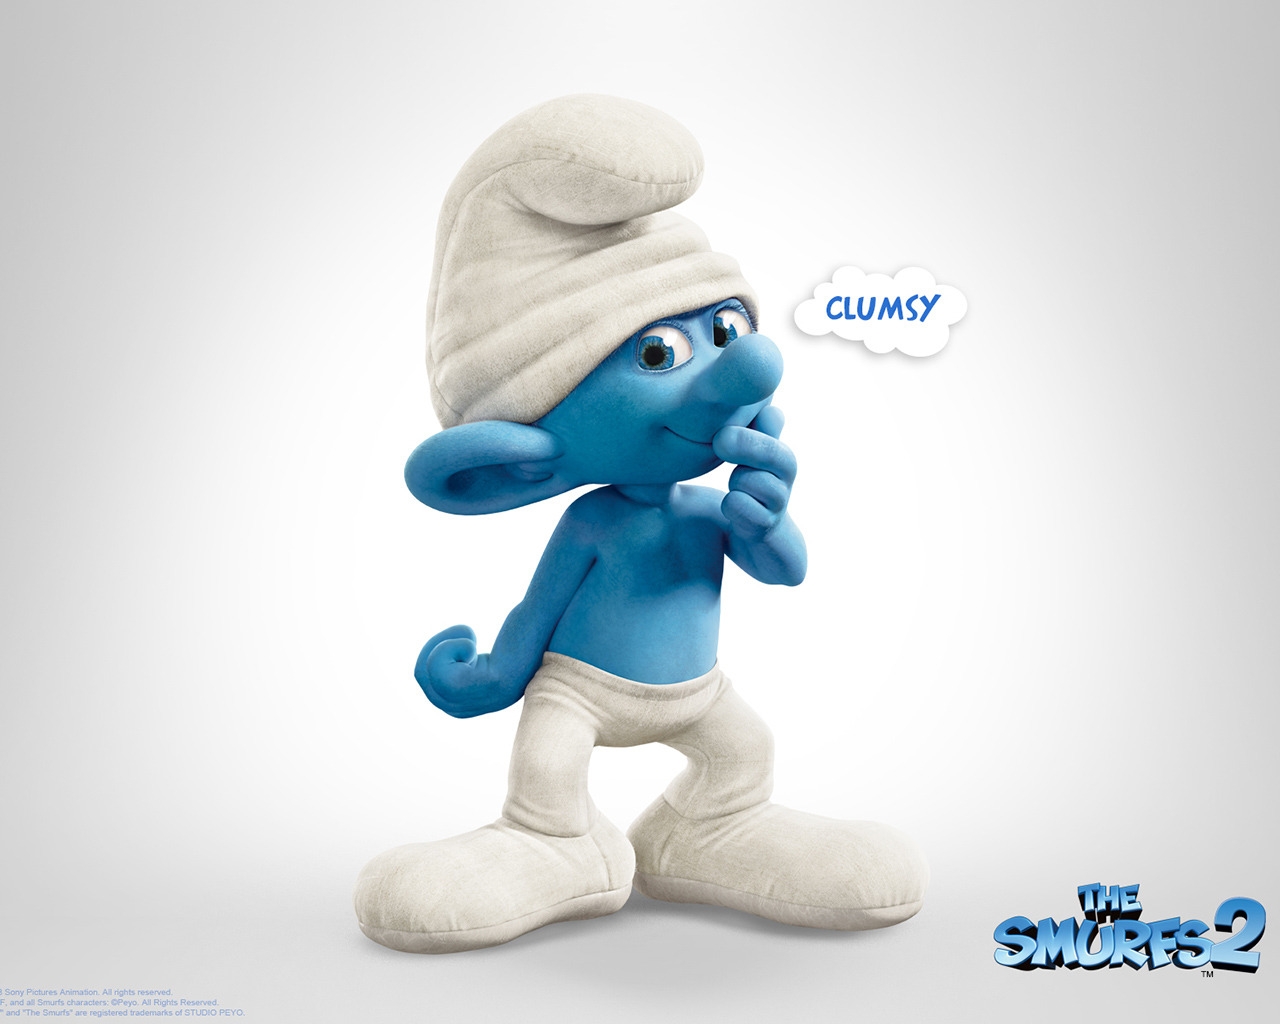 Clumsy The Smurfs 2 for 1280 x 1024 resolution